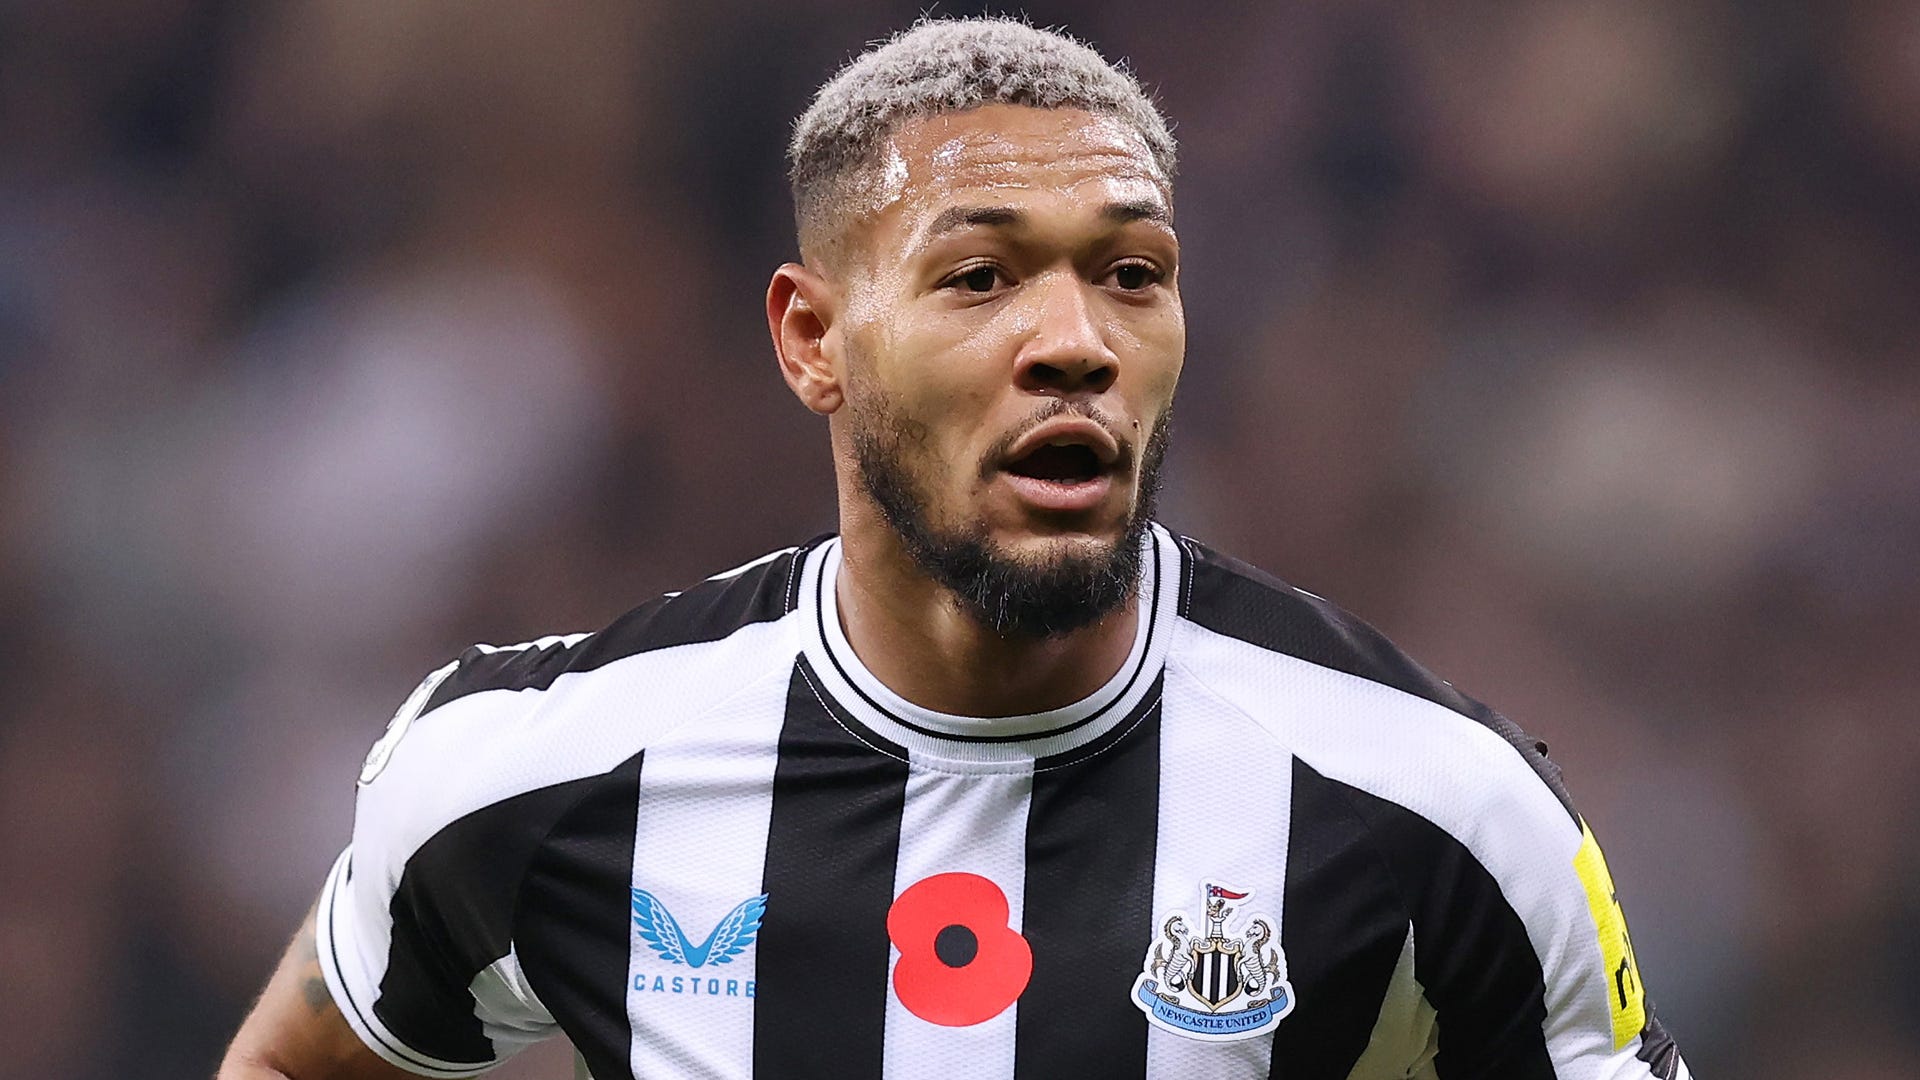 Newcastle star Joelinton fined £29,000 for drink-driving and issued 12-month driving ban | Goal.com Nigeria